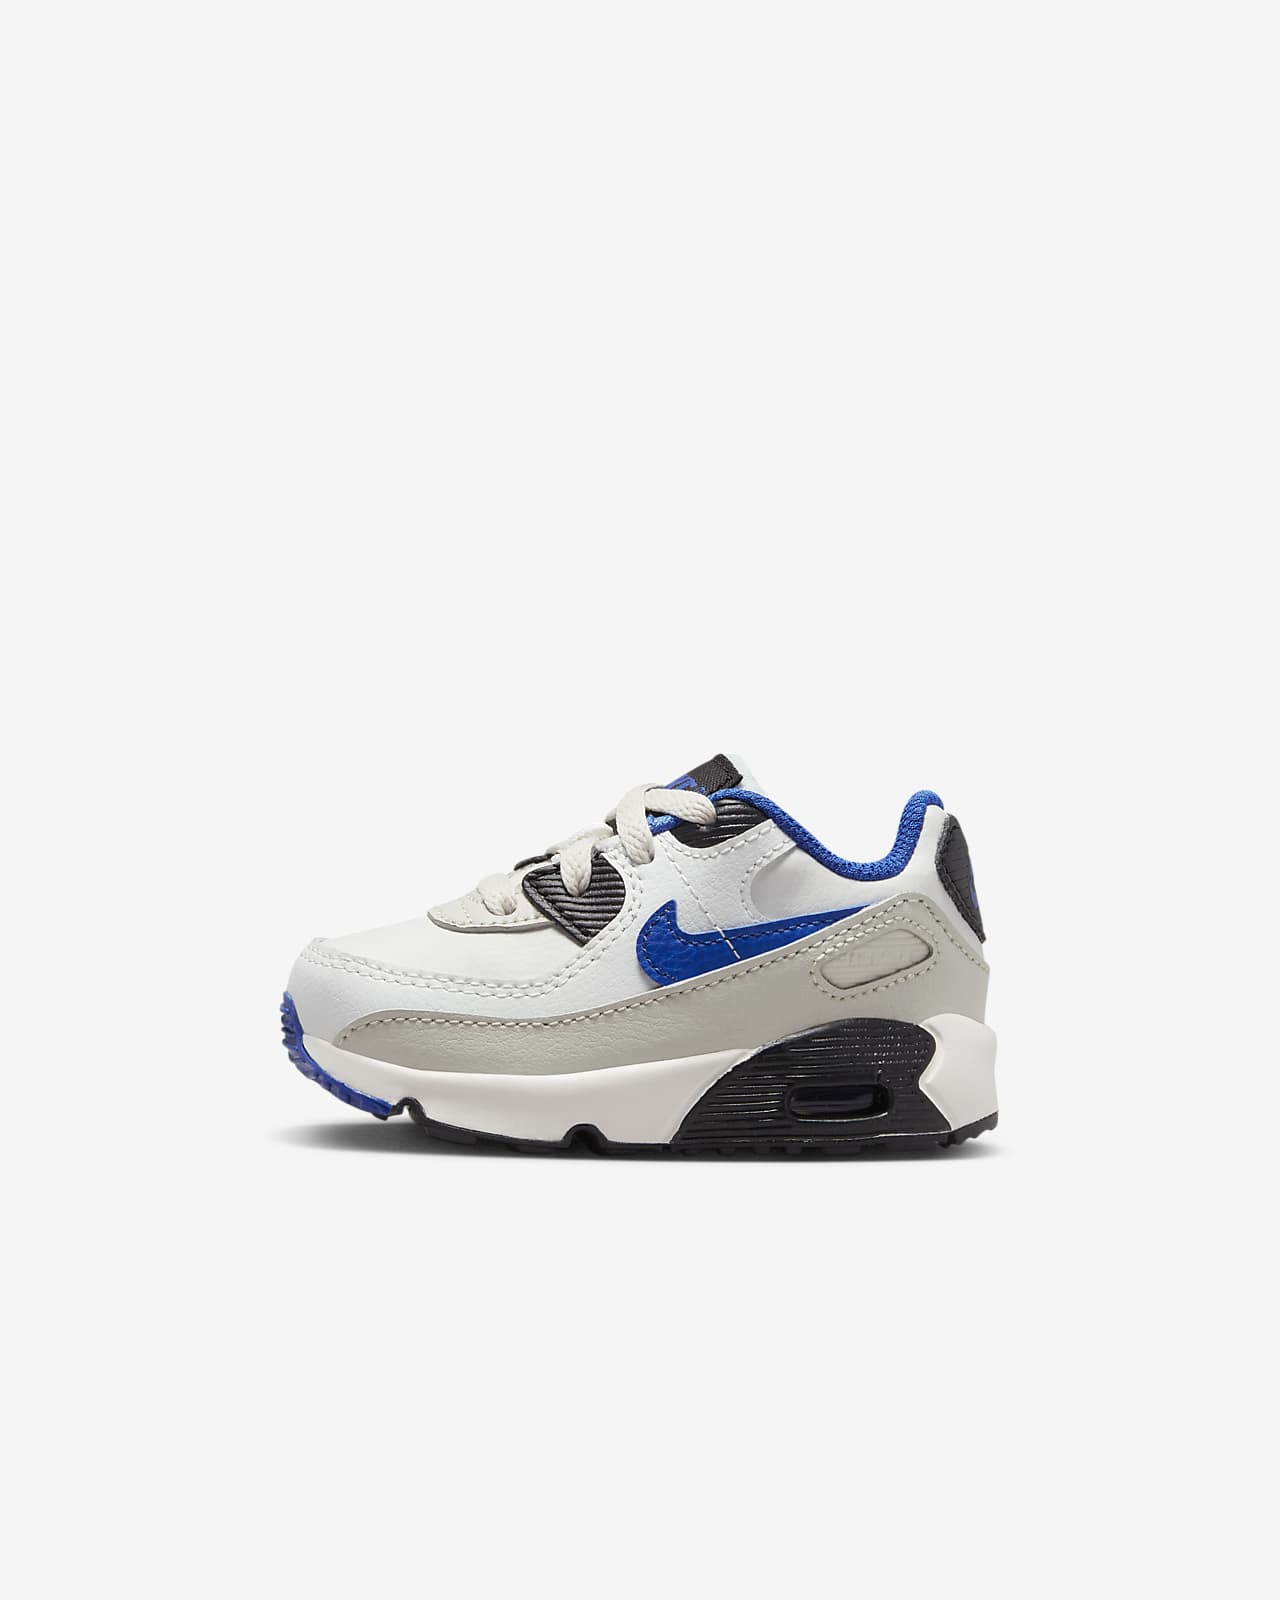 Nike Air Max 90 LTR Baby/Toddler Shoes. Nike AE